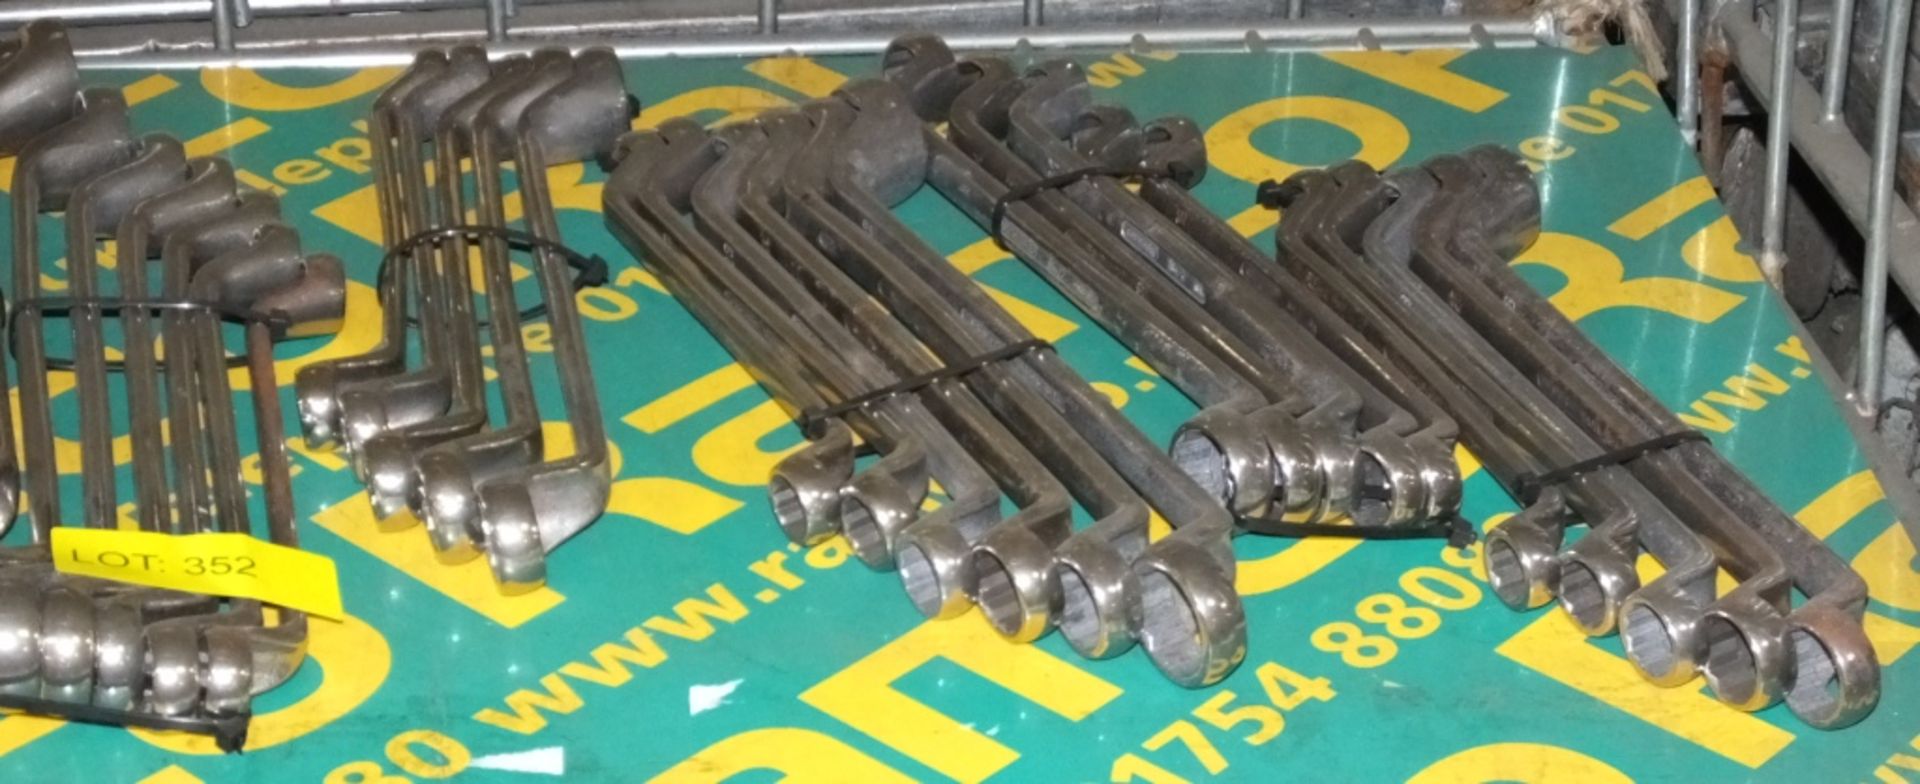 8 sets of Ring Spanners - Image 2 of 3